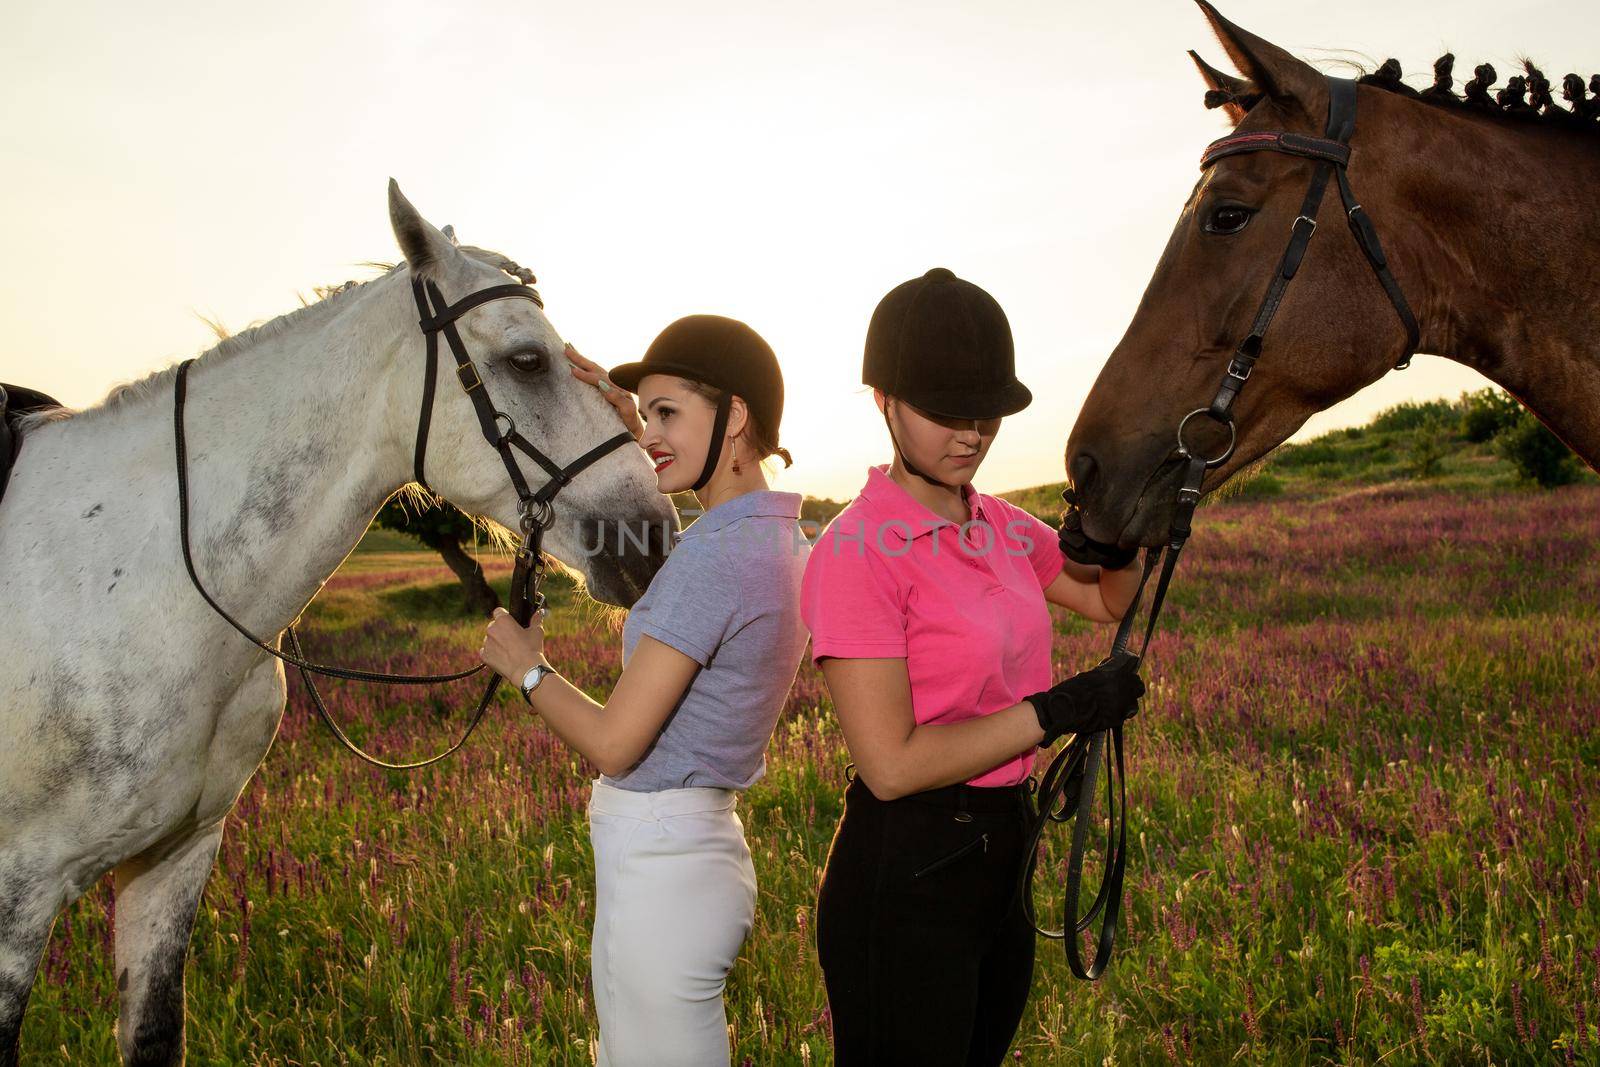 Two woman and two horses outdoor in summer happy sunset together nature. Taking care of animals, love and friendship concept.